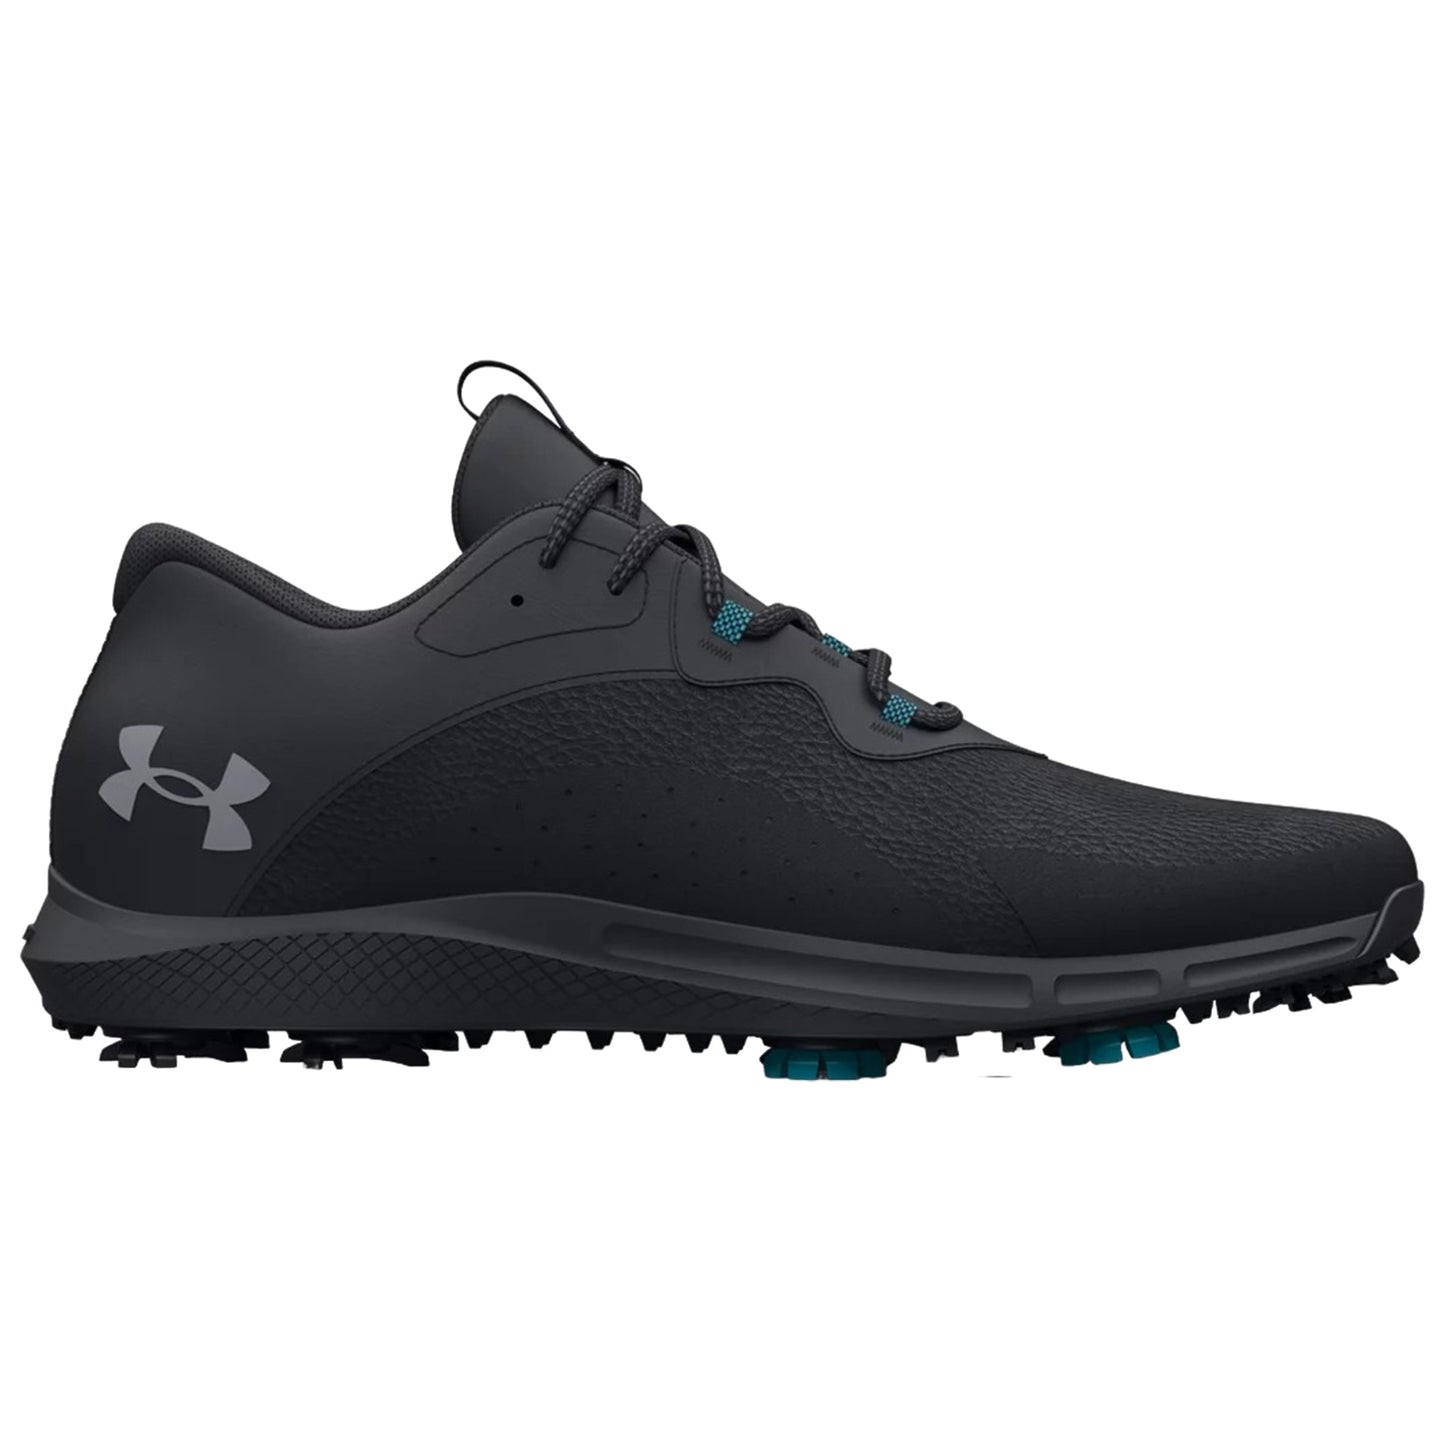 Under Armour Mens Charged Draw 2 RST Golf Shoes